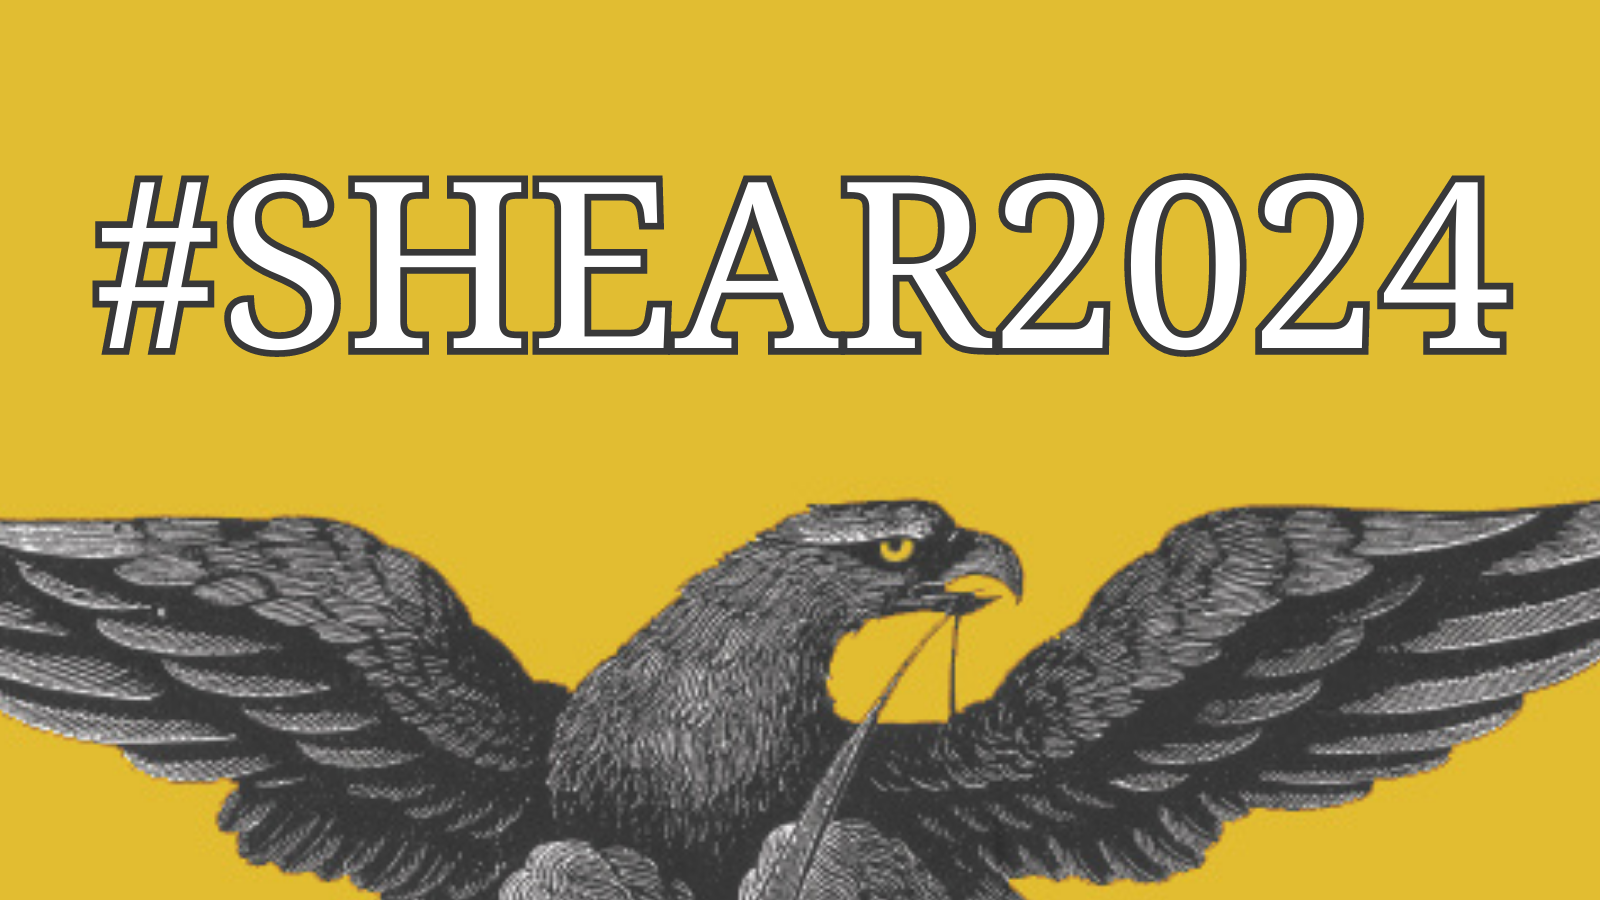 SHEAR eagle against a mustard yellow background with the words #SHEAR2024